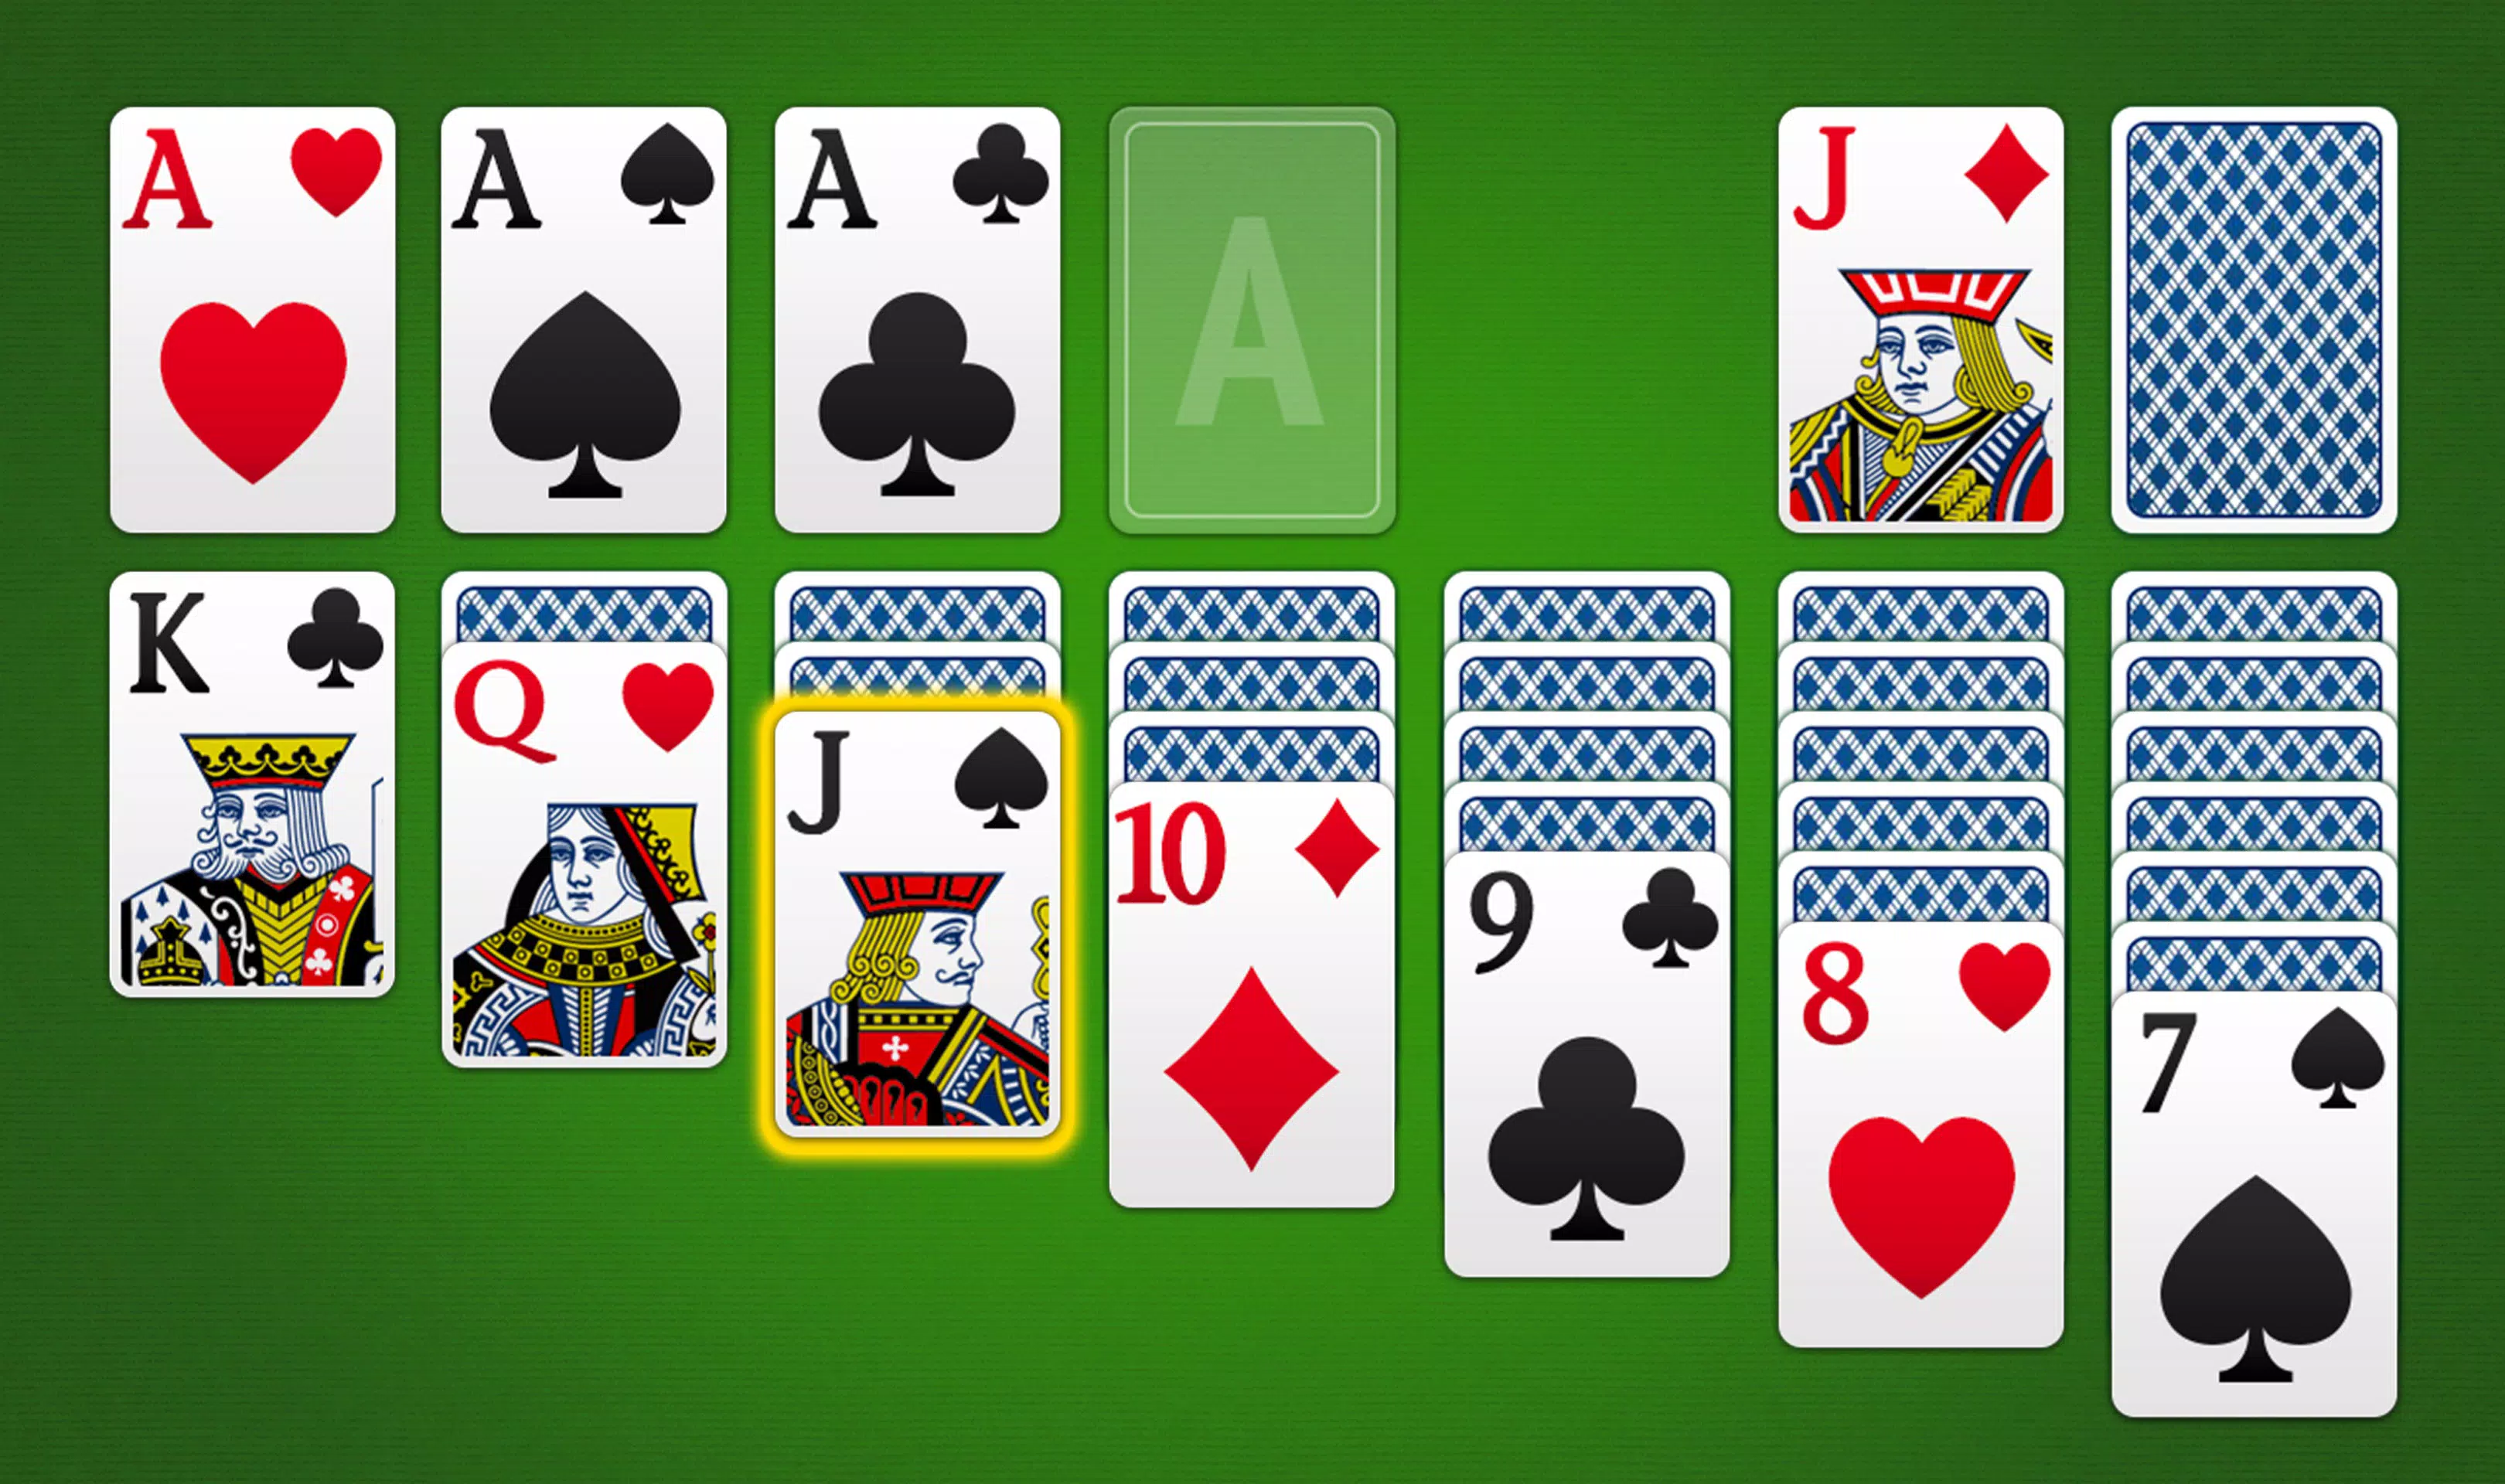 Solitaire - Classic Card Game - APK Download for Android